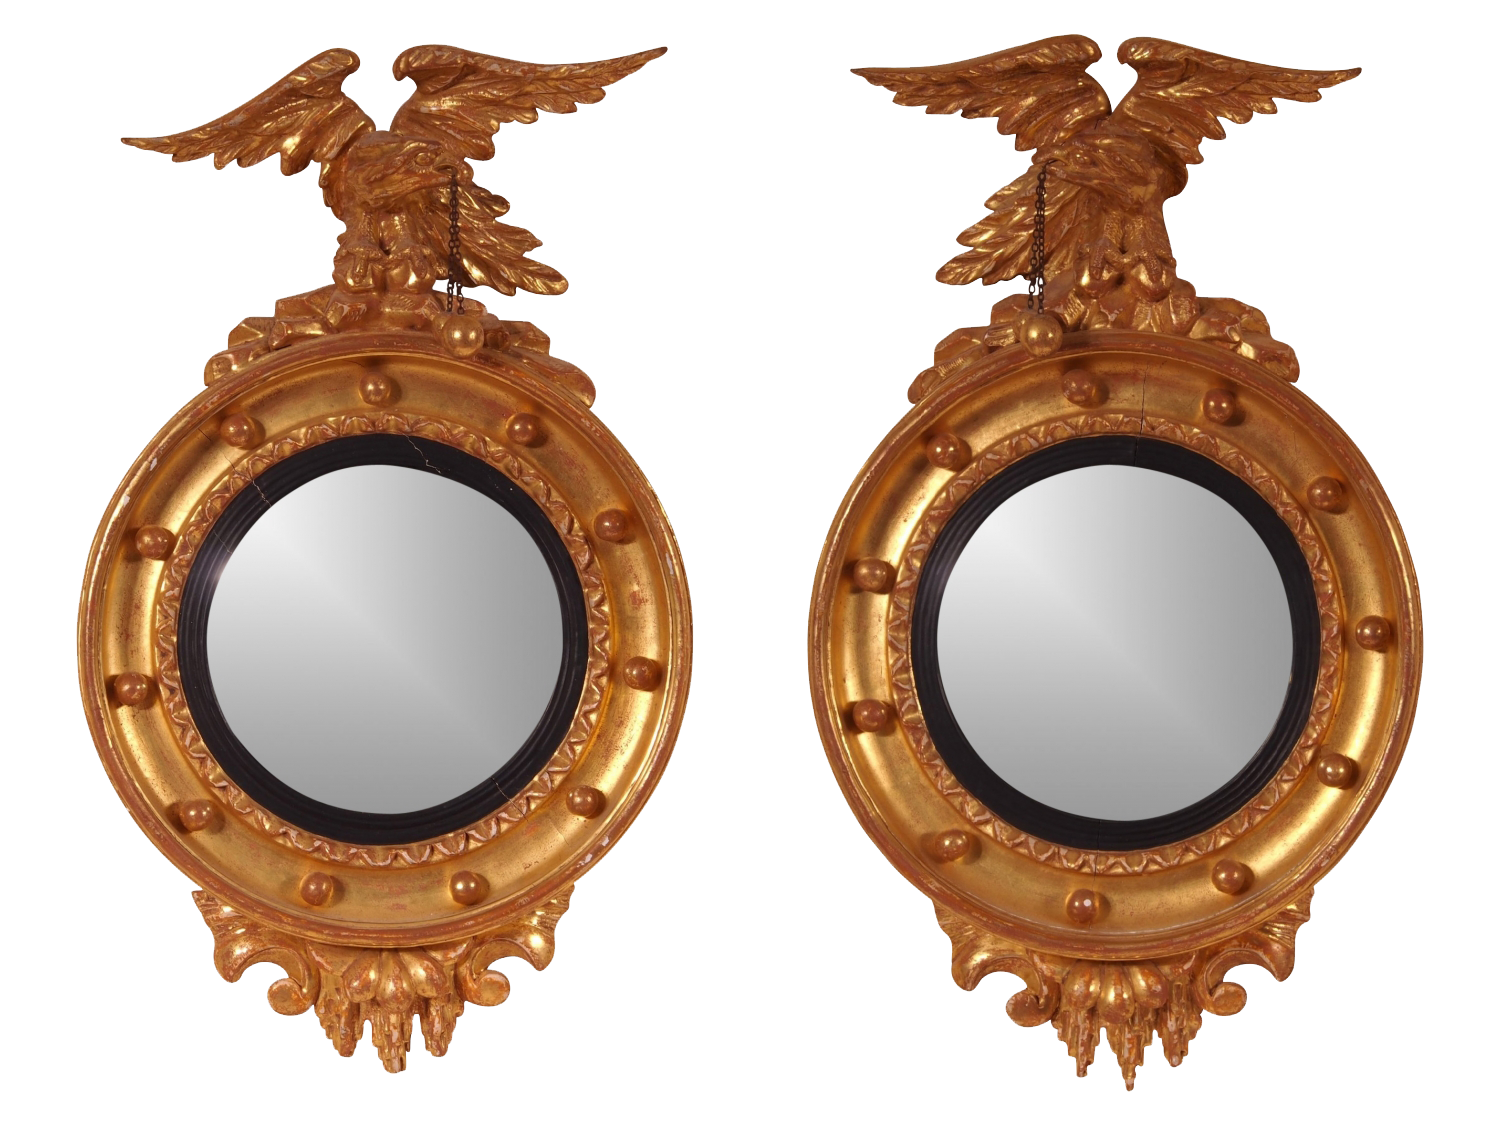 Pair Of 19th Century Carved Wood, Gilt And Gesso Convex Wall Mirrors